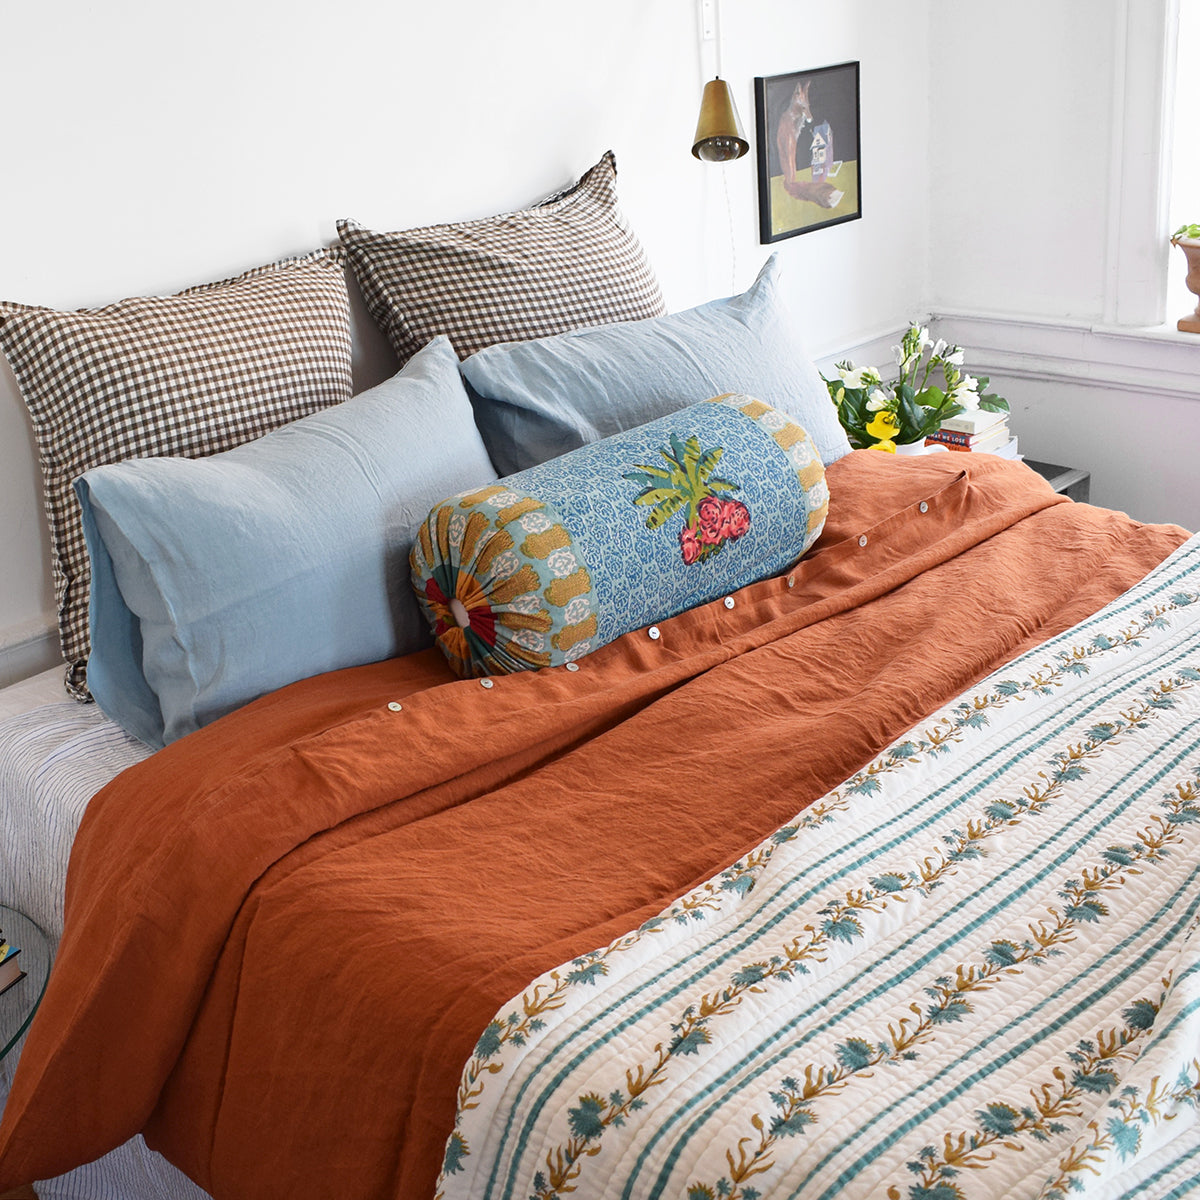 A Linge Particulier Linen Duvet in Sienna gives a orange and rust color to this duvet for a colorful linen bedding look from Collyer's Mansion